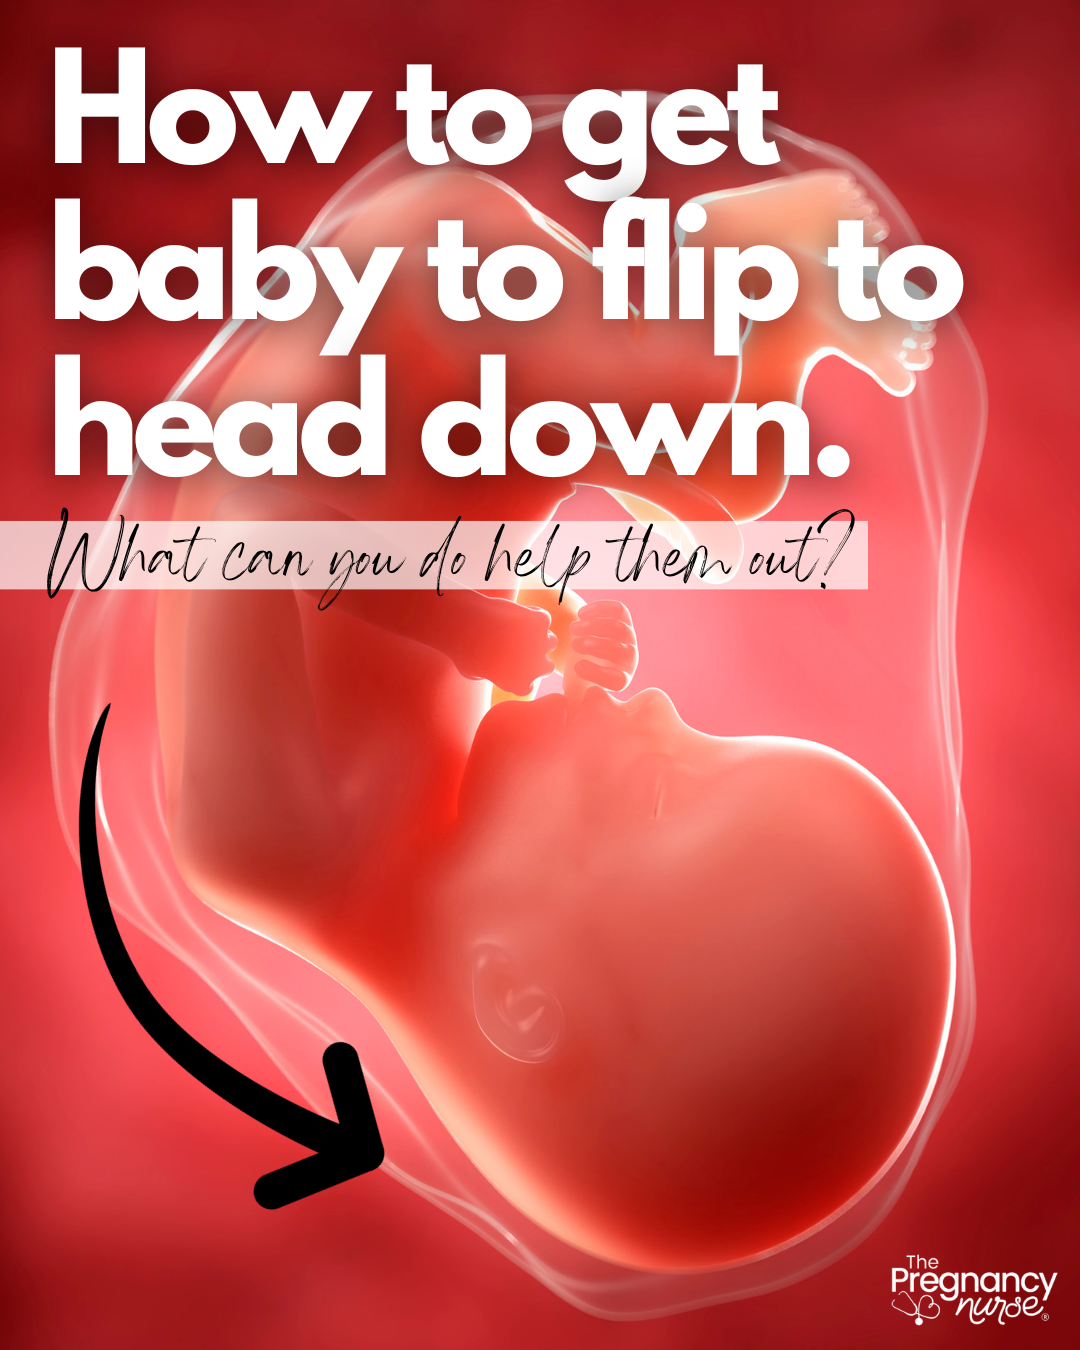 human fetus / how to get baby to flip to head down (what can you do to help it).